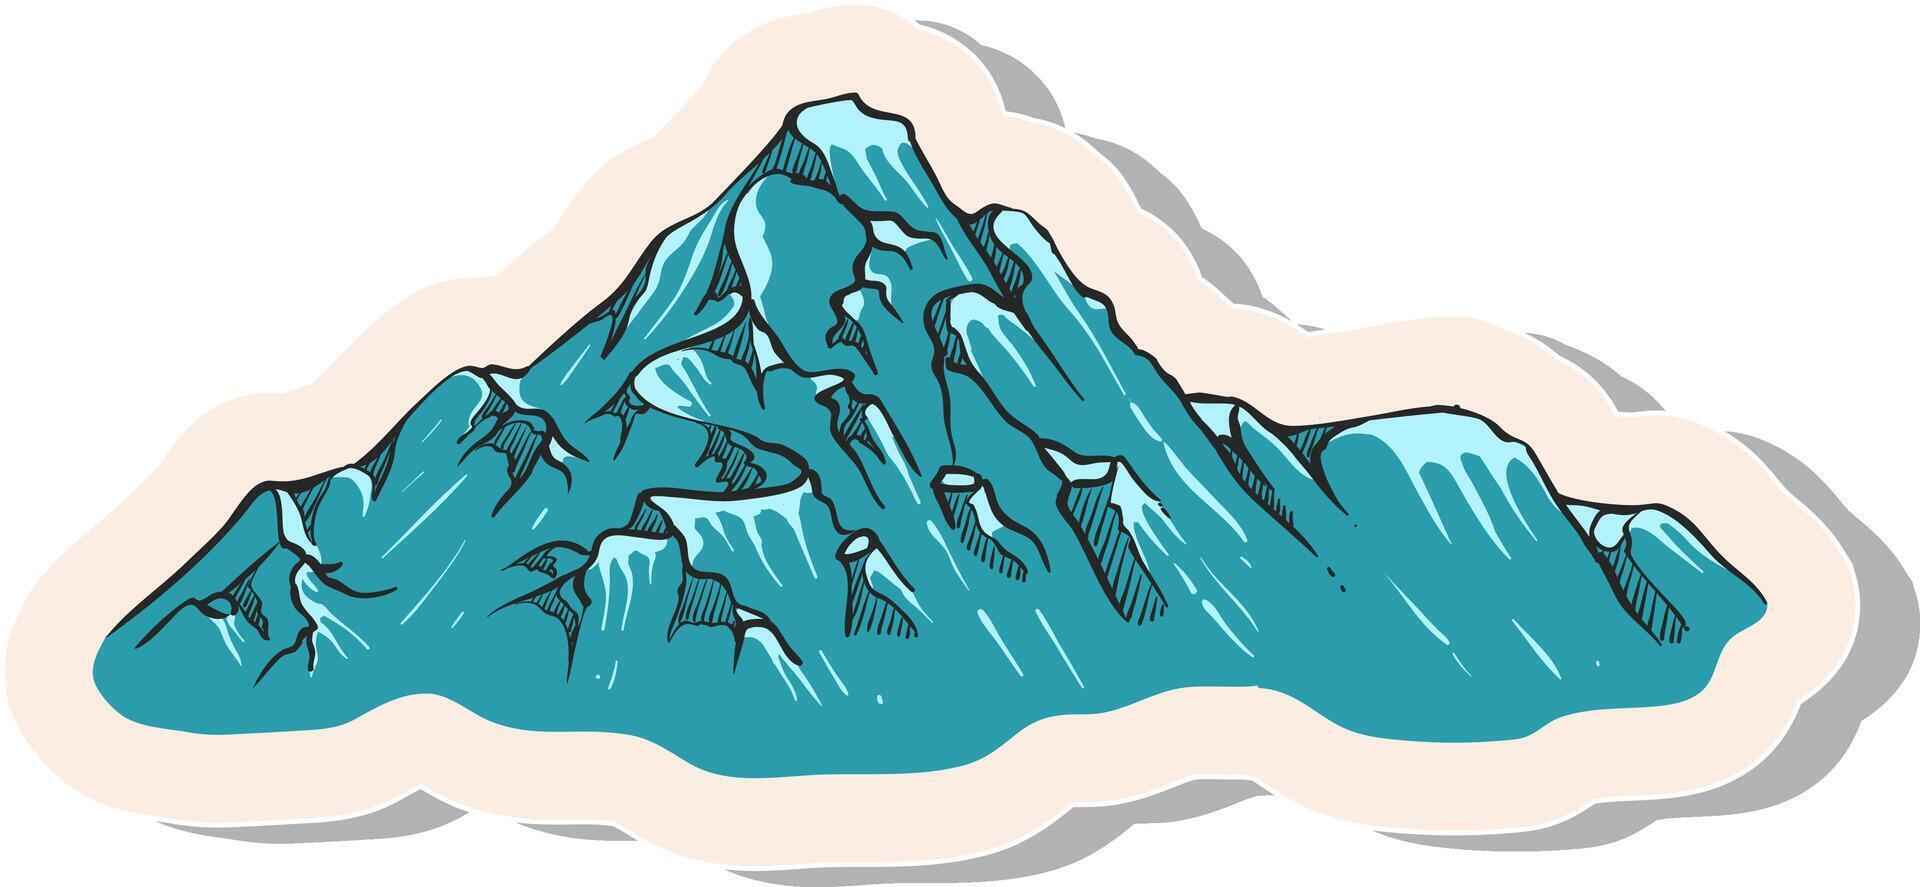 Hand drawn mountains in sticker style vector illustration